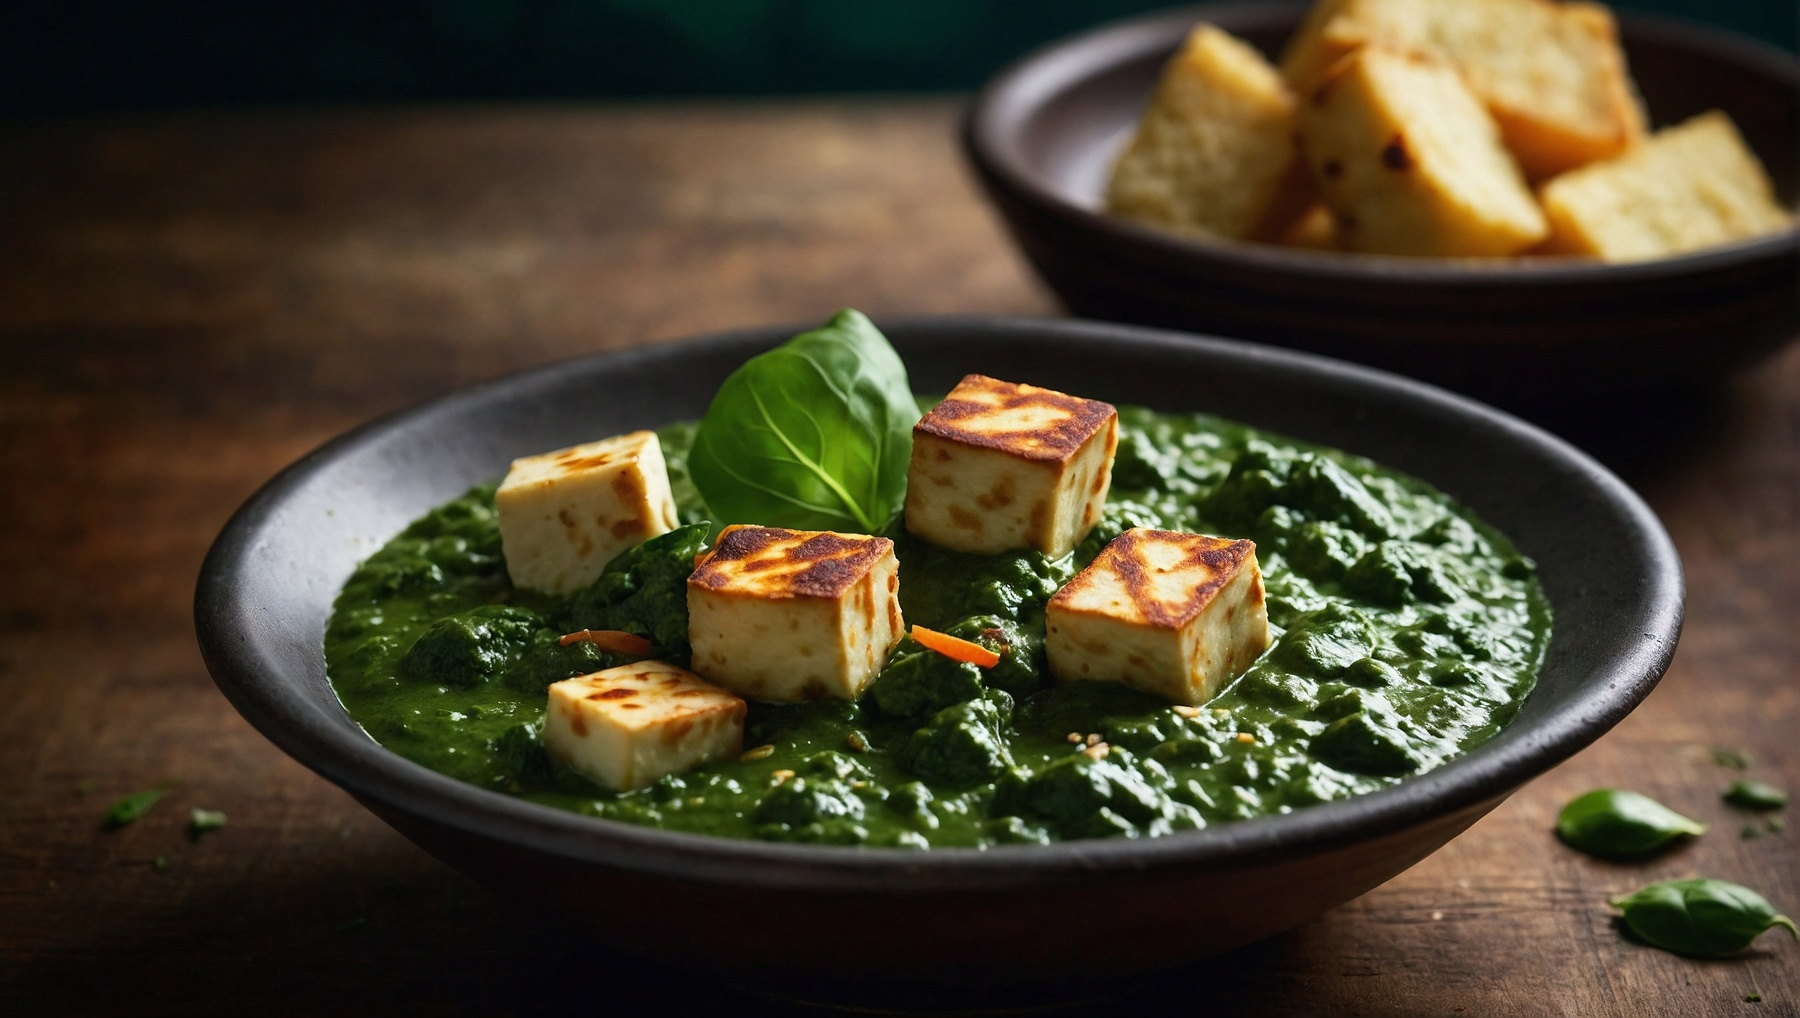 Palak paneer dish - a popular Indian cuisine featuring spinach and paneer cheese.